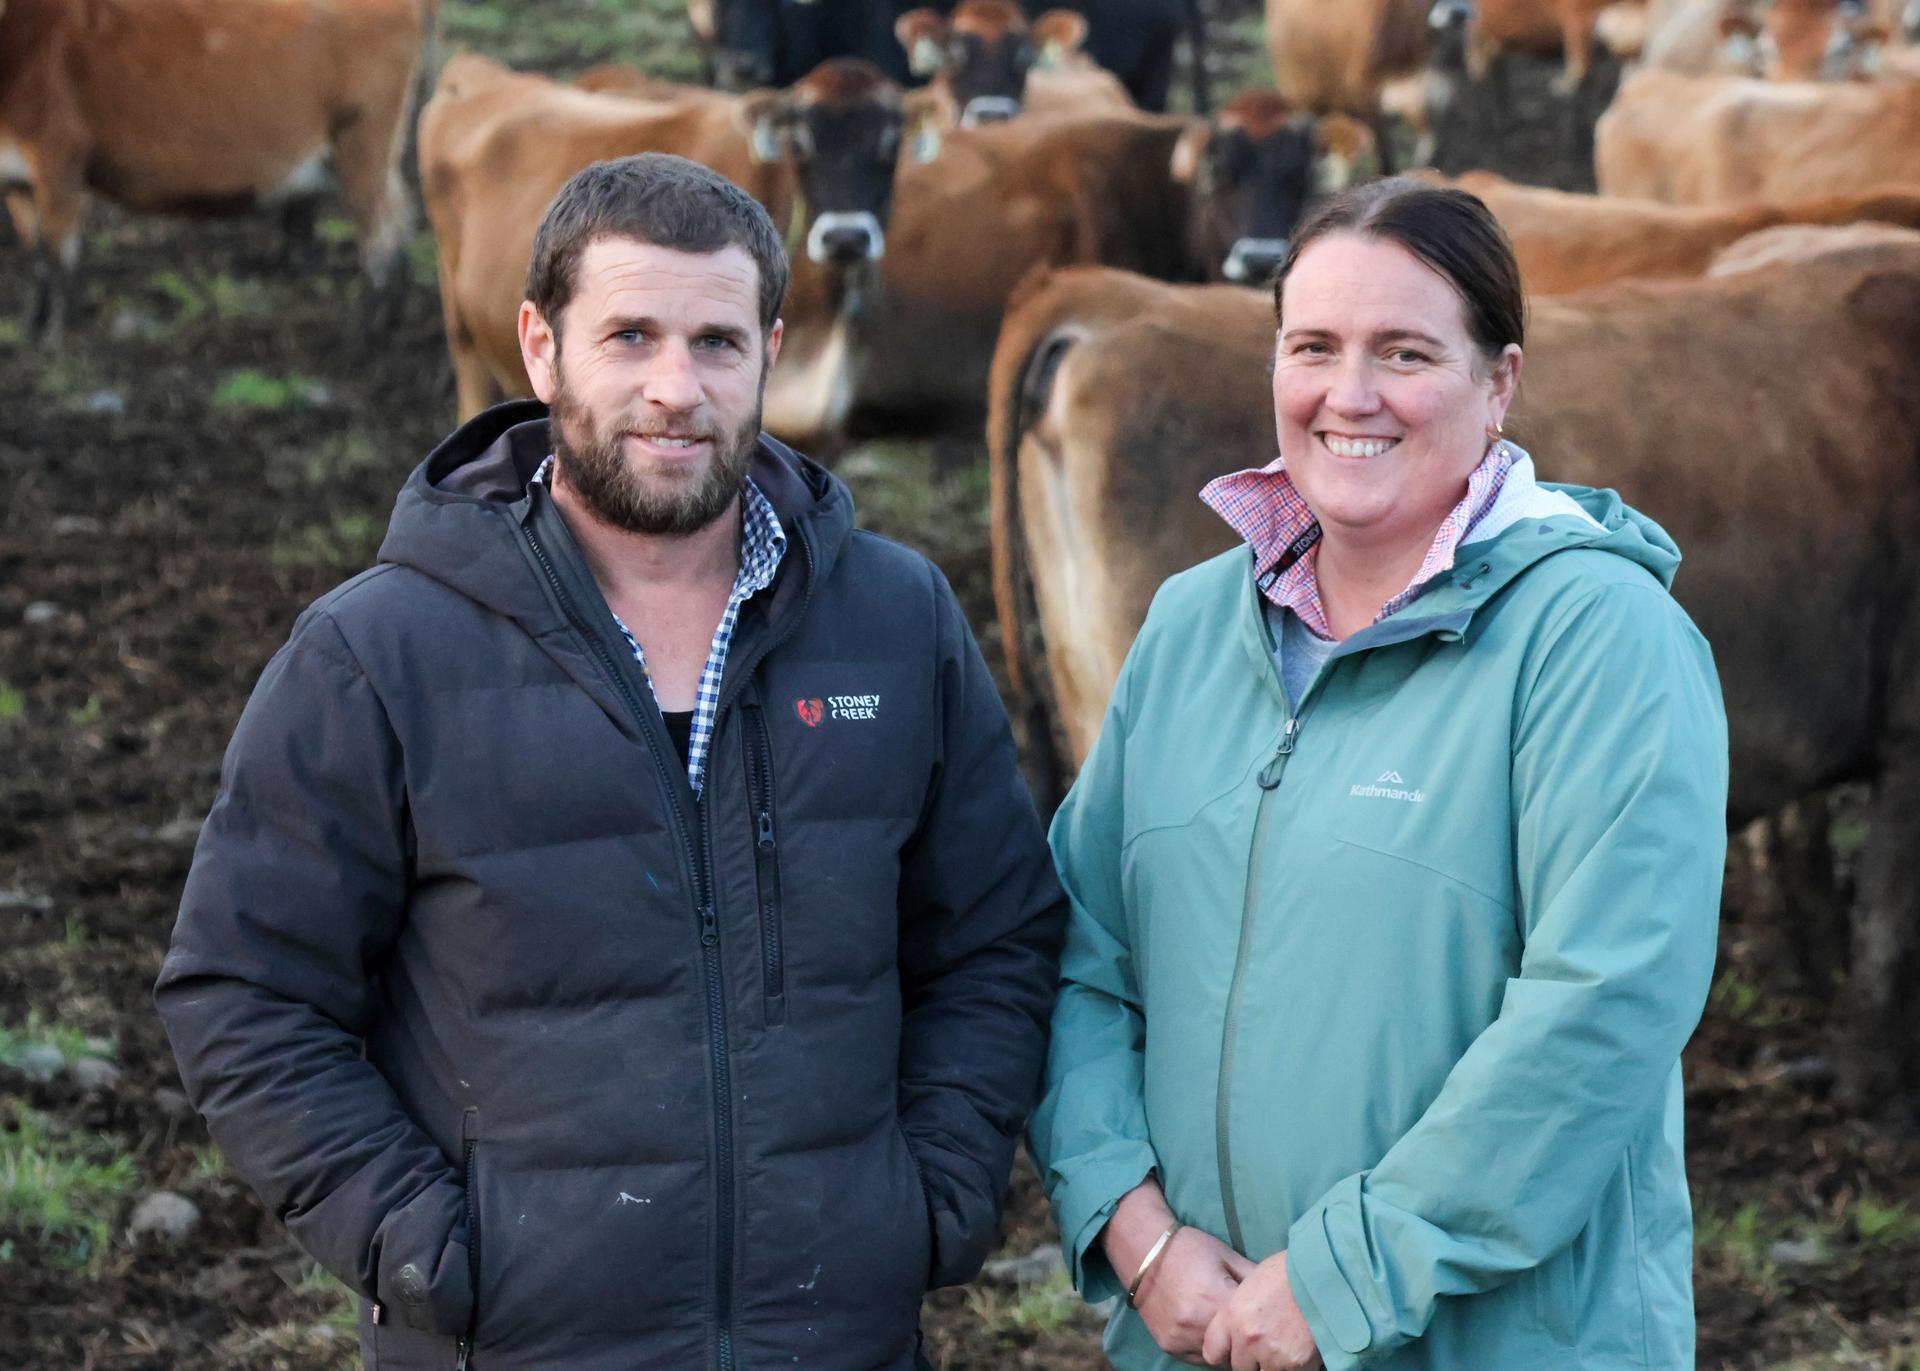 John and Nicola Guy’s production peaked last season – both on a per cow and total kilograms of milk solids (MS) – with 30 less cows than at different times during their career.